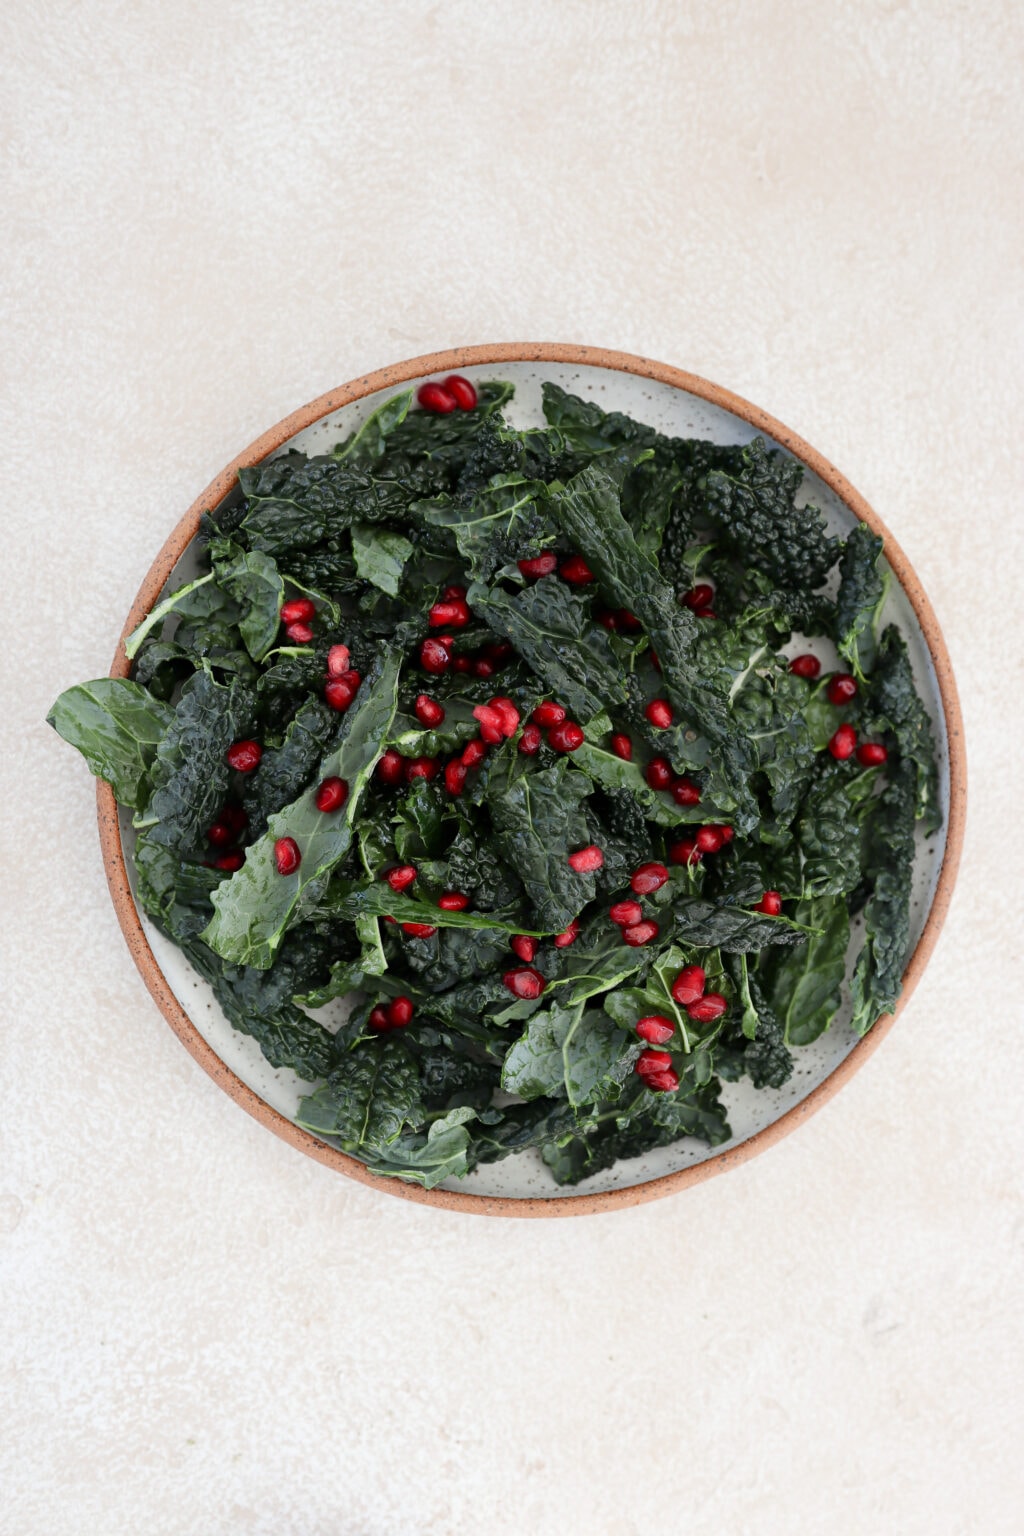 A speckled grey bowl with a brown rim has town dine kale in it and pomegranate arils (or seeds).